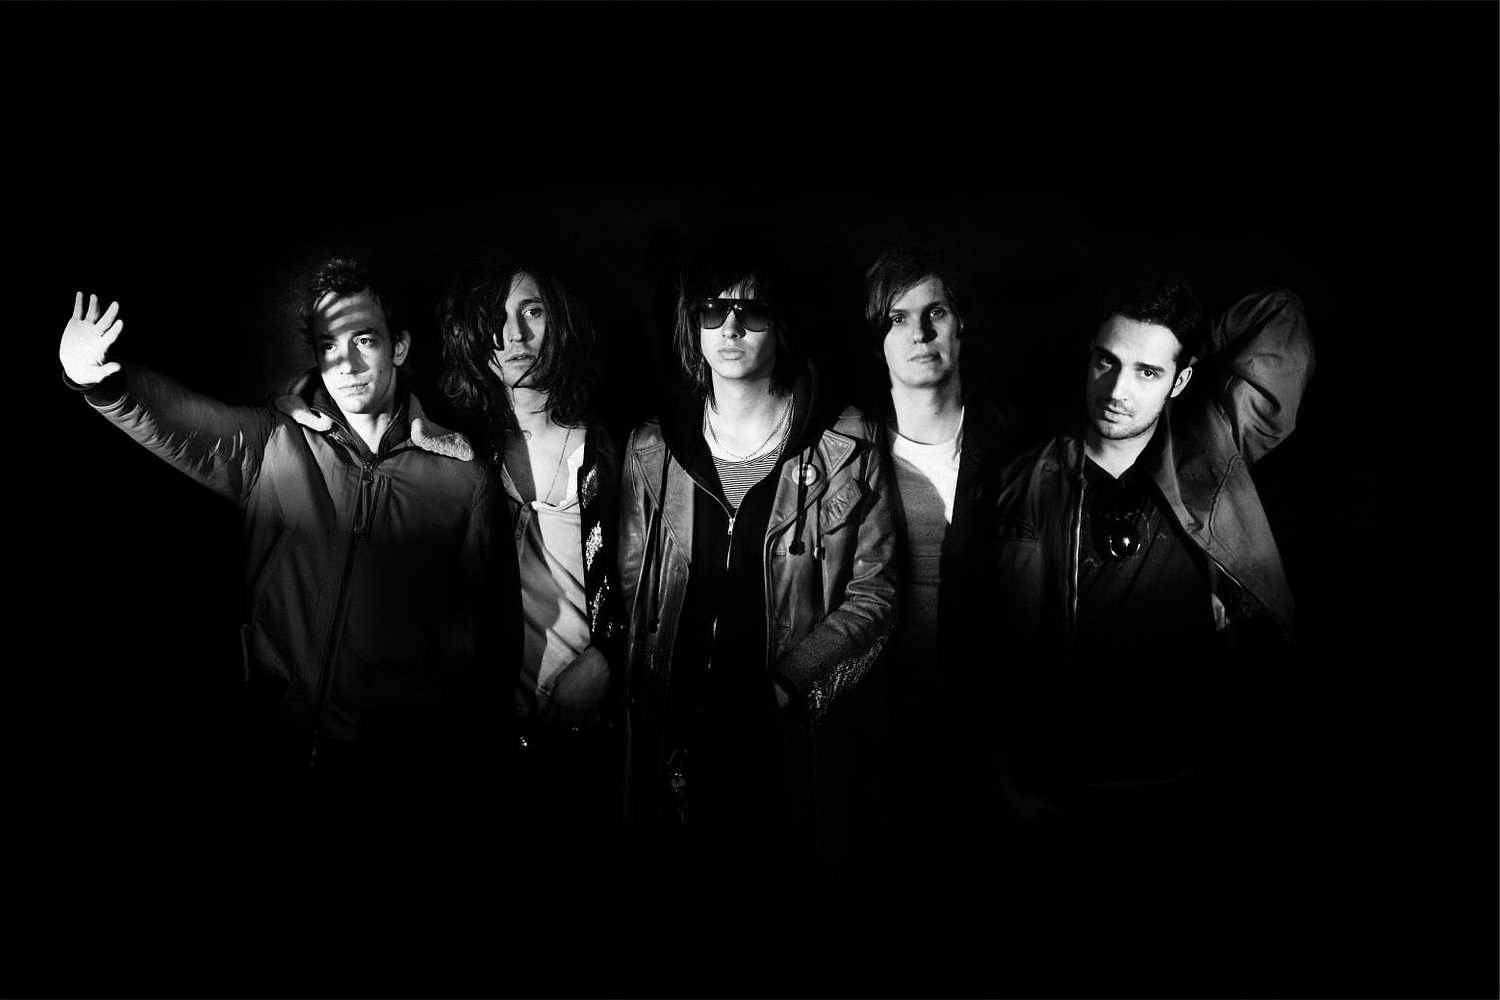 Apparently The Strokes aren’t in the studio right now after all